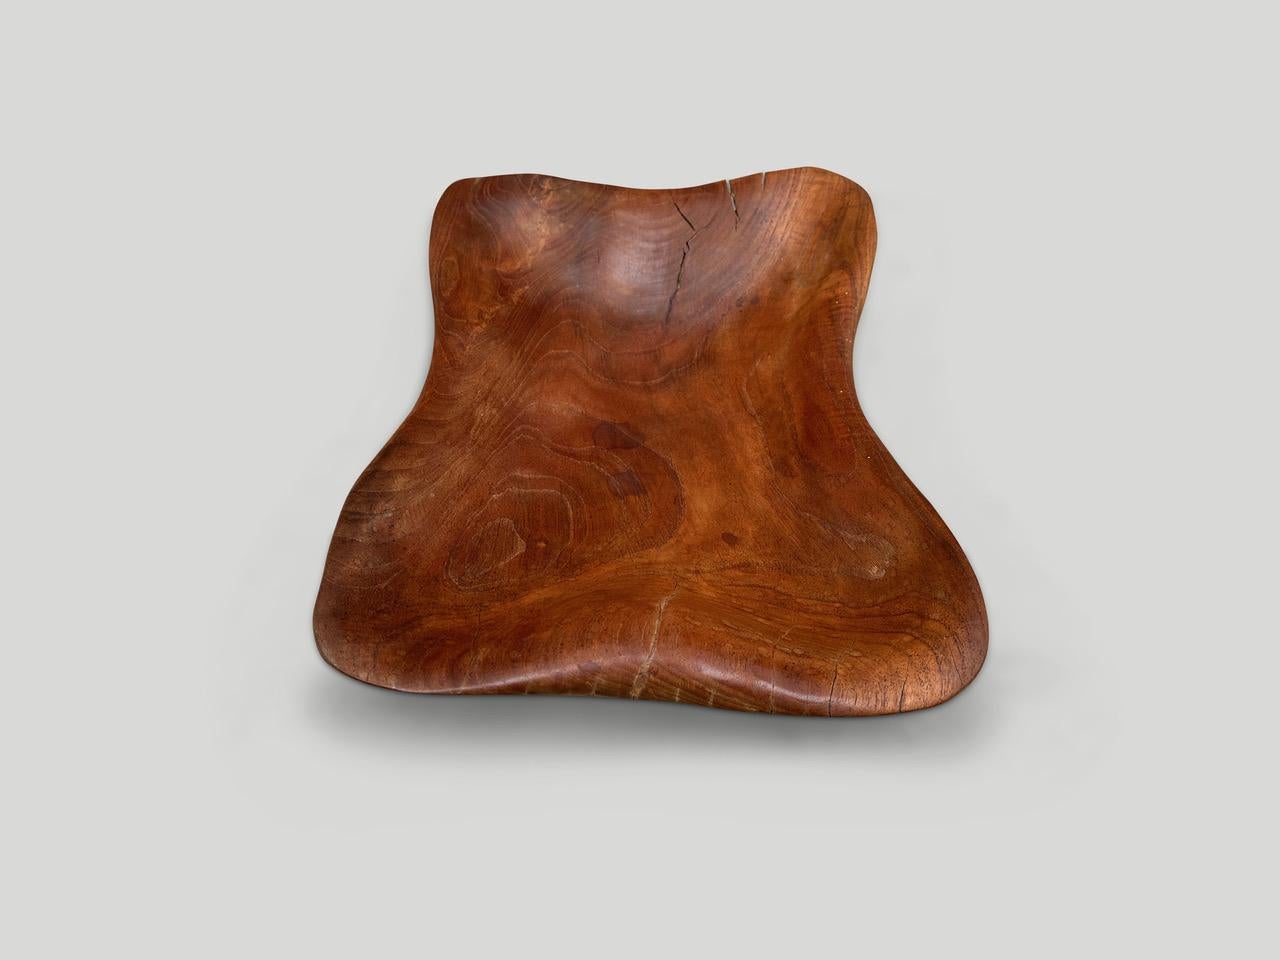 Andrianna Shamaris Minimalist Teak Wood Sculptural Bowl In Excellent Condition For Sale In New York, NY